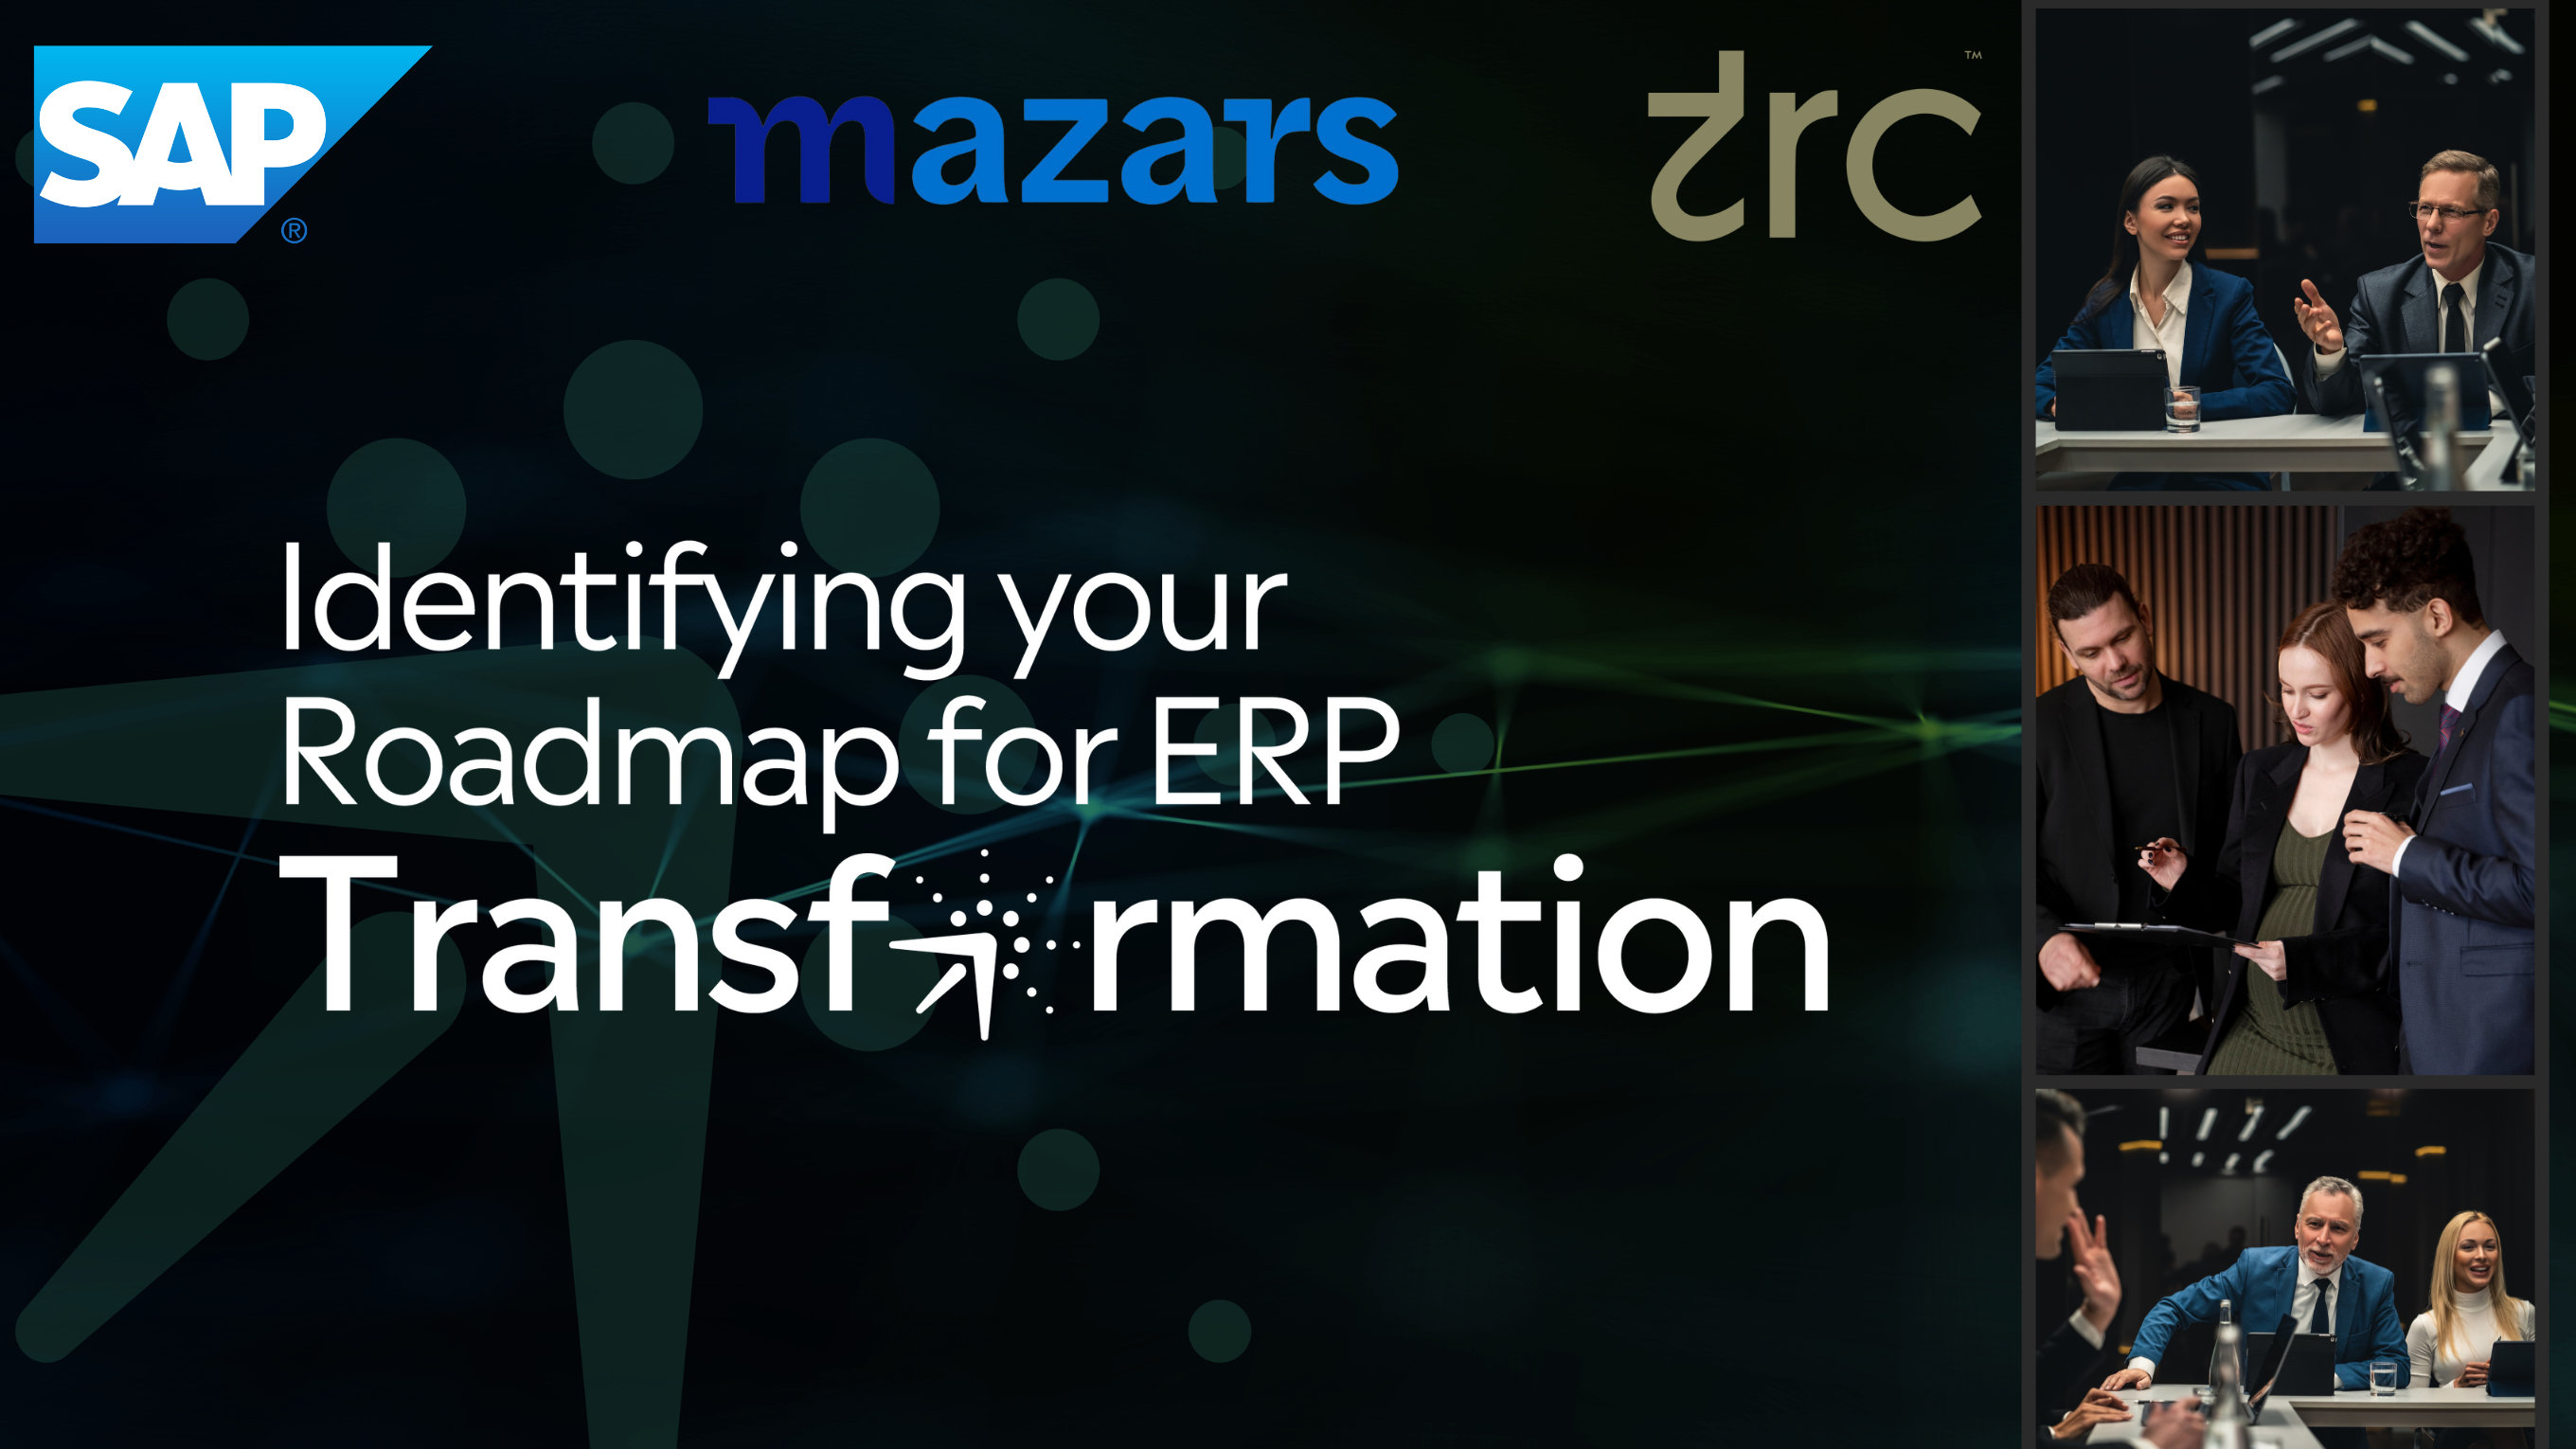 Join Mazars, SAP and TRC Solutions for Exclusive Roundtable Event